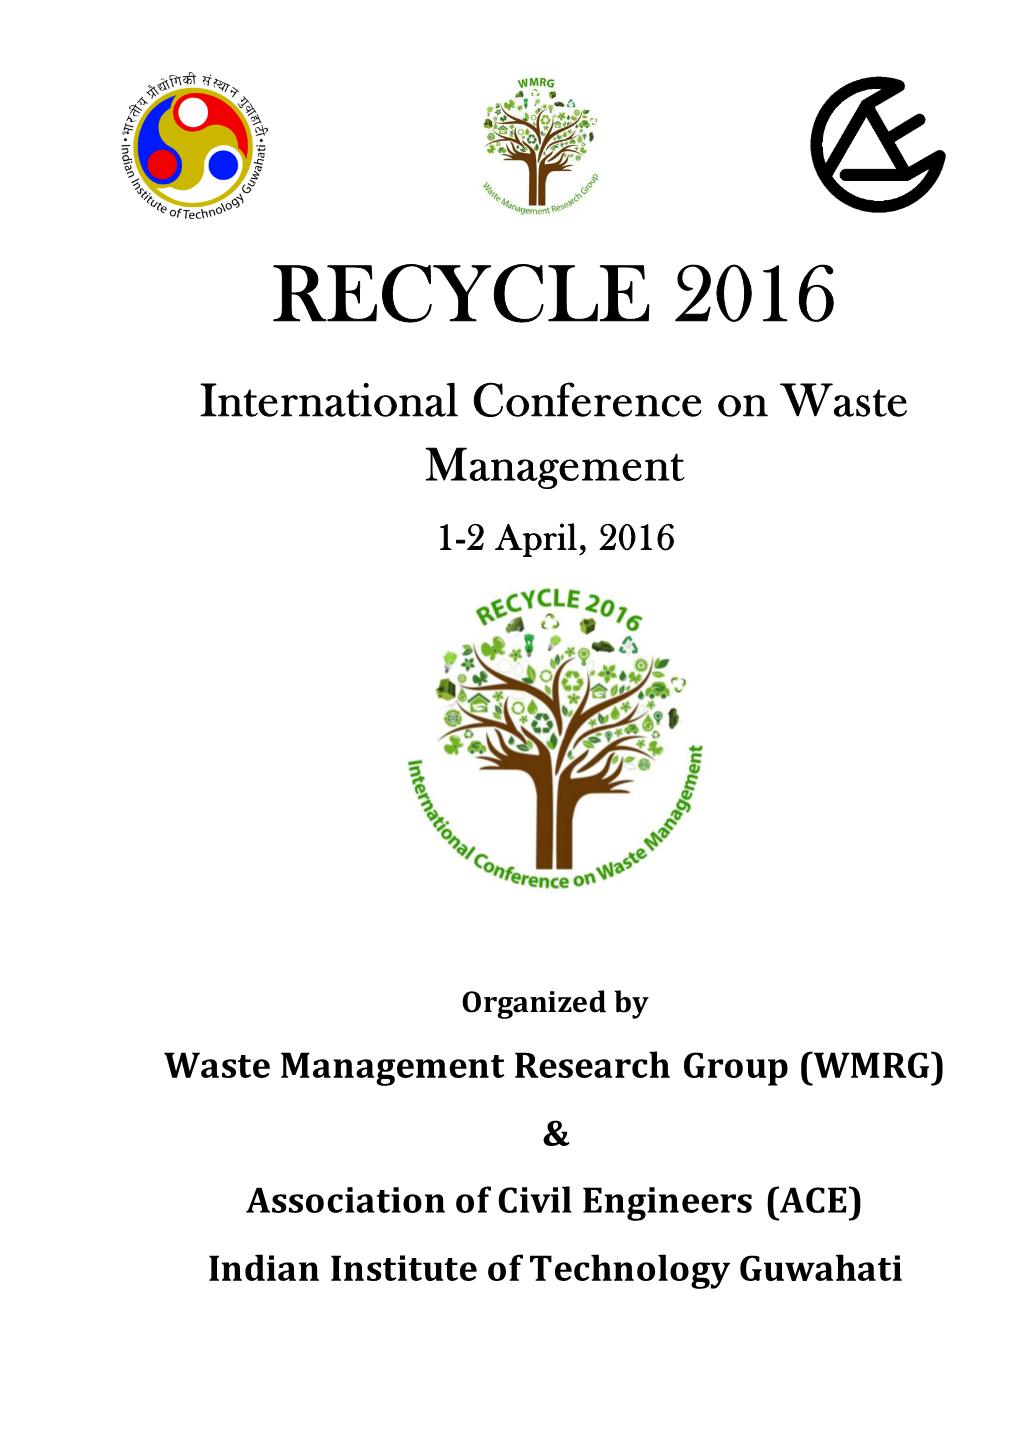 RECYCLE 2016 International Conference on Waste Management 1-2 April, 2016